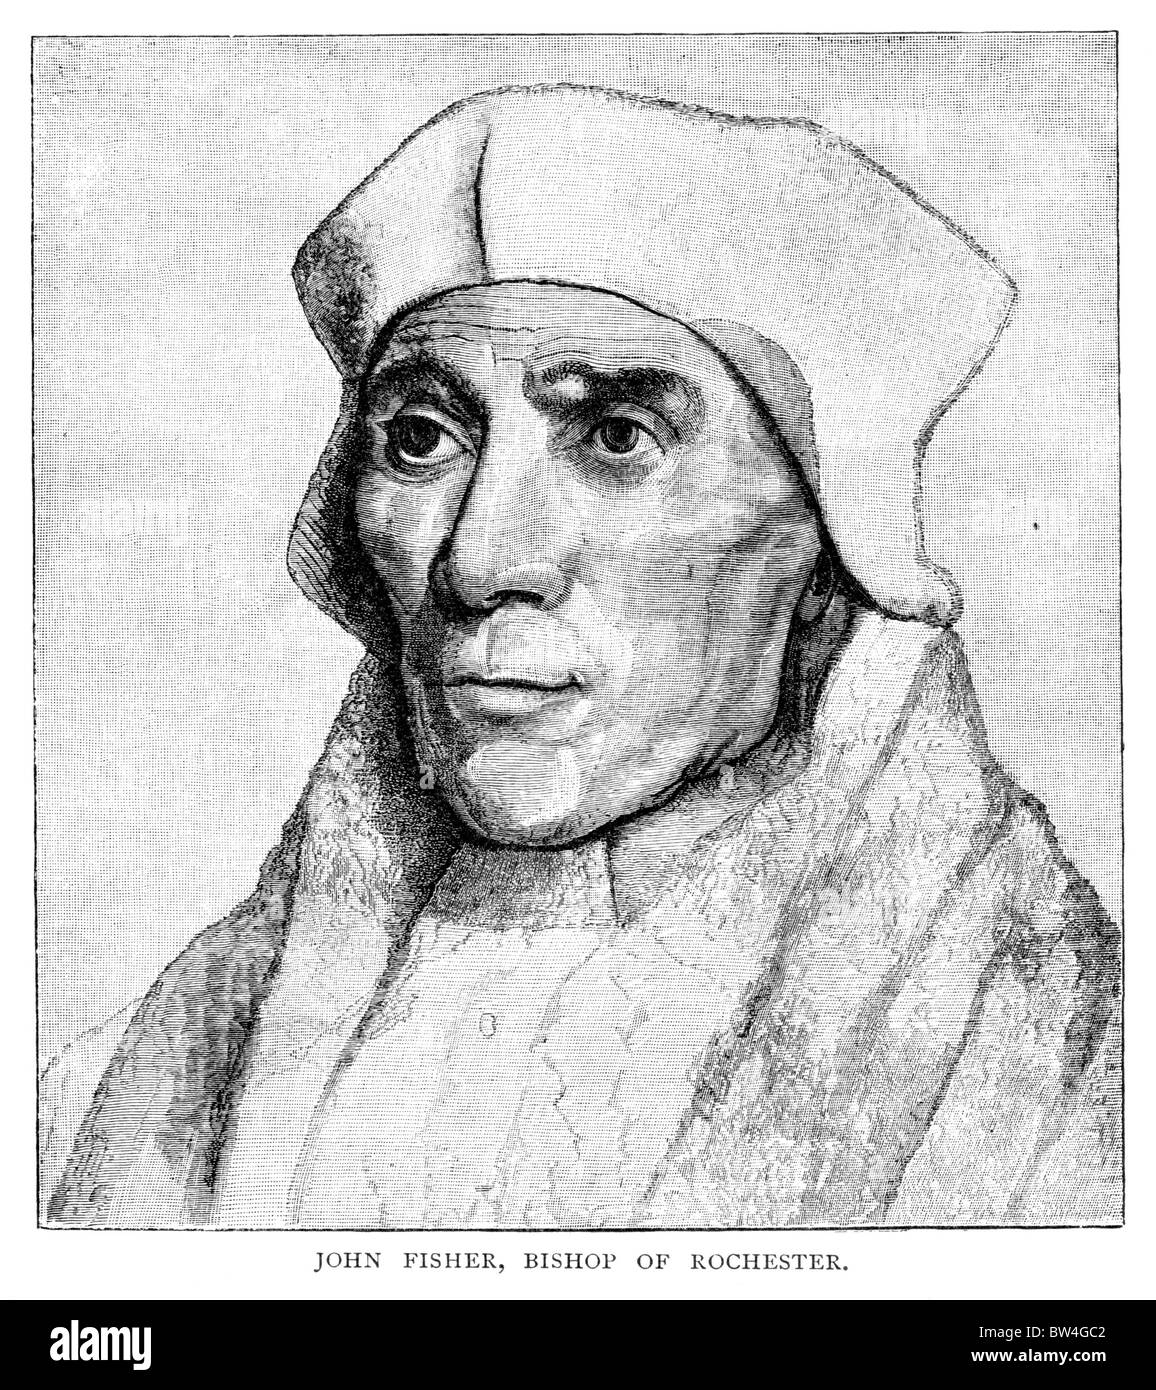 Cardinal John Fisher, Bishop of Rochester, Saint and Martyr; Black and White Illustration from a drawing by Holbein Stock Photo